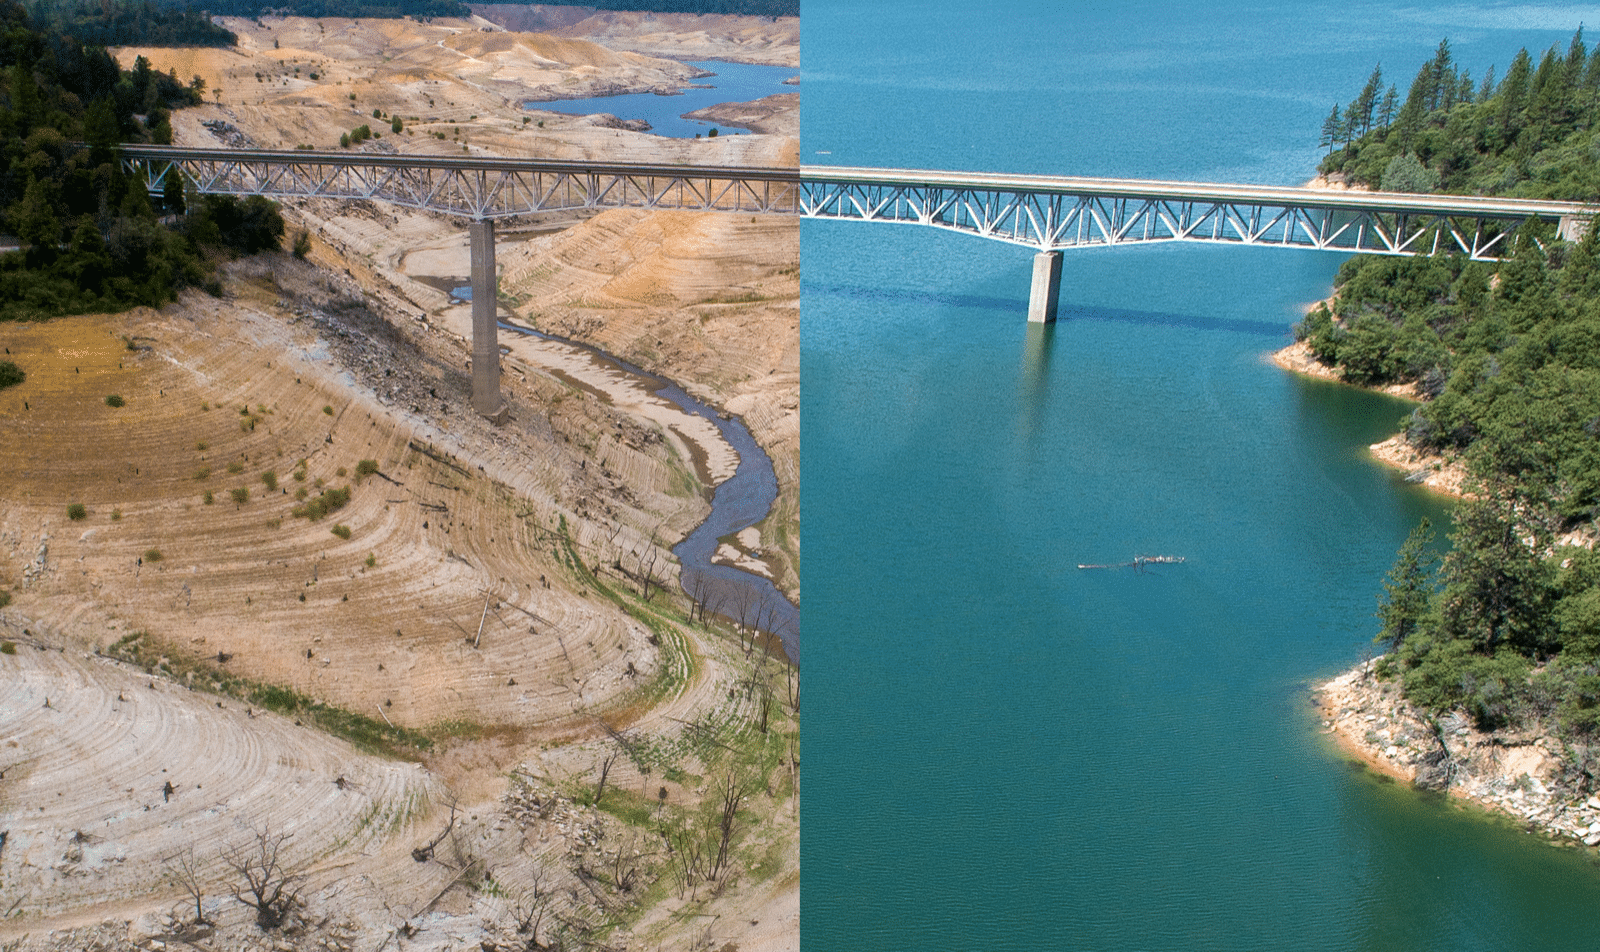 A view of Lake Oroville at 96 percent capacity on May 11, 2016 (right), and in drought conditions on July 26, 2021 (left). Move slider to reveal photo